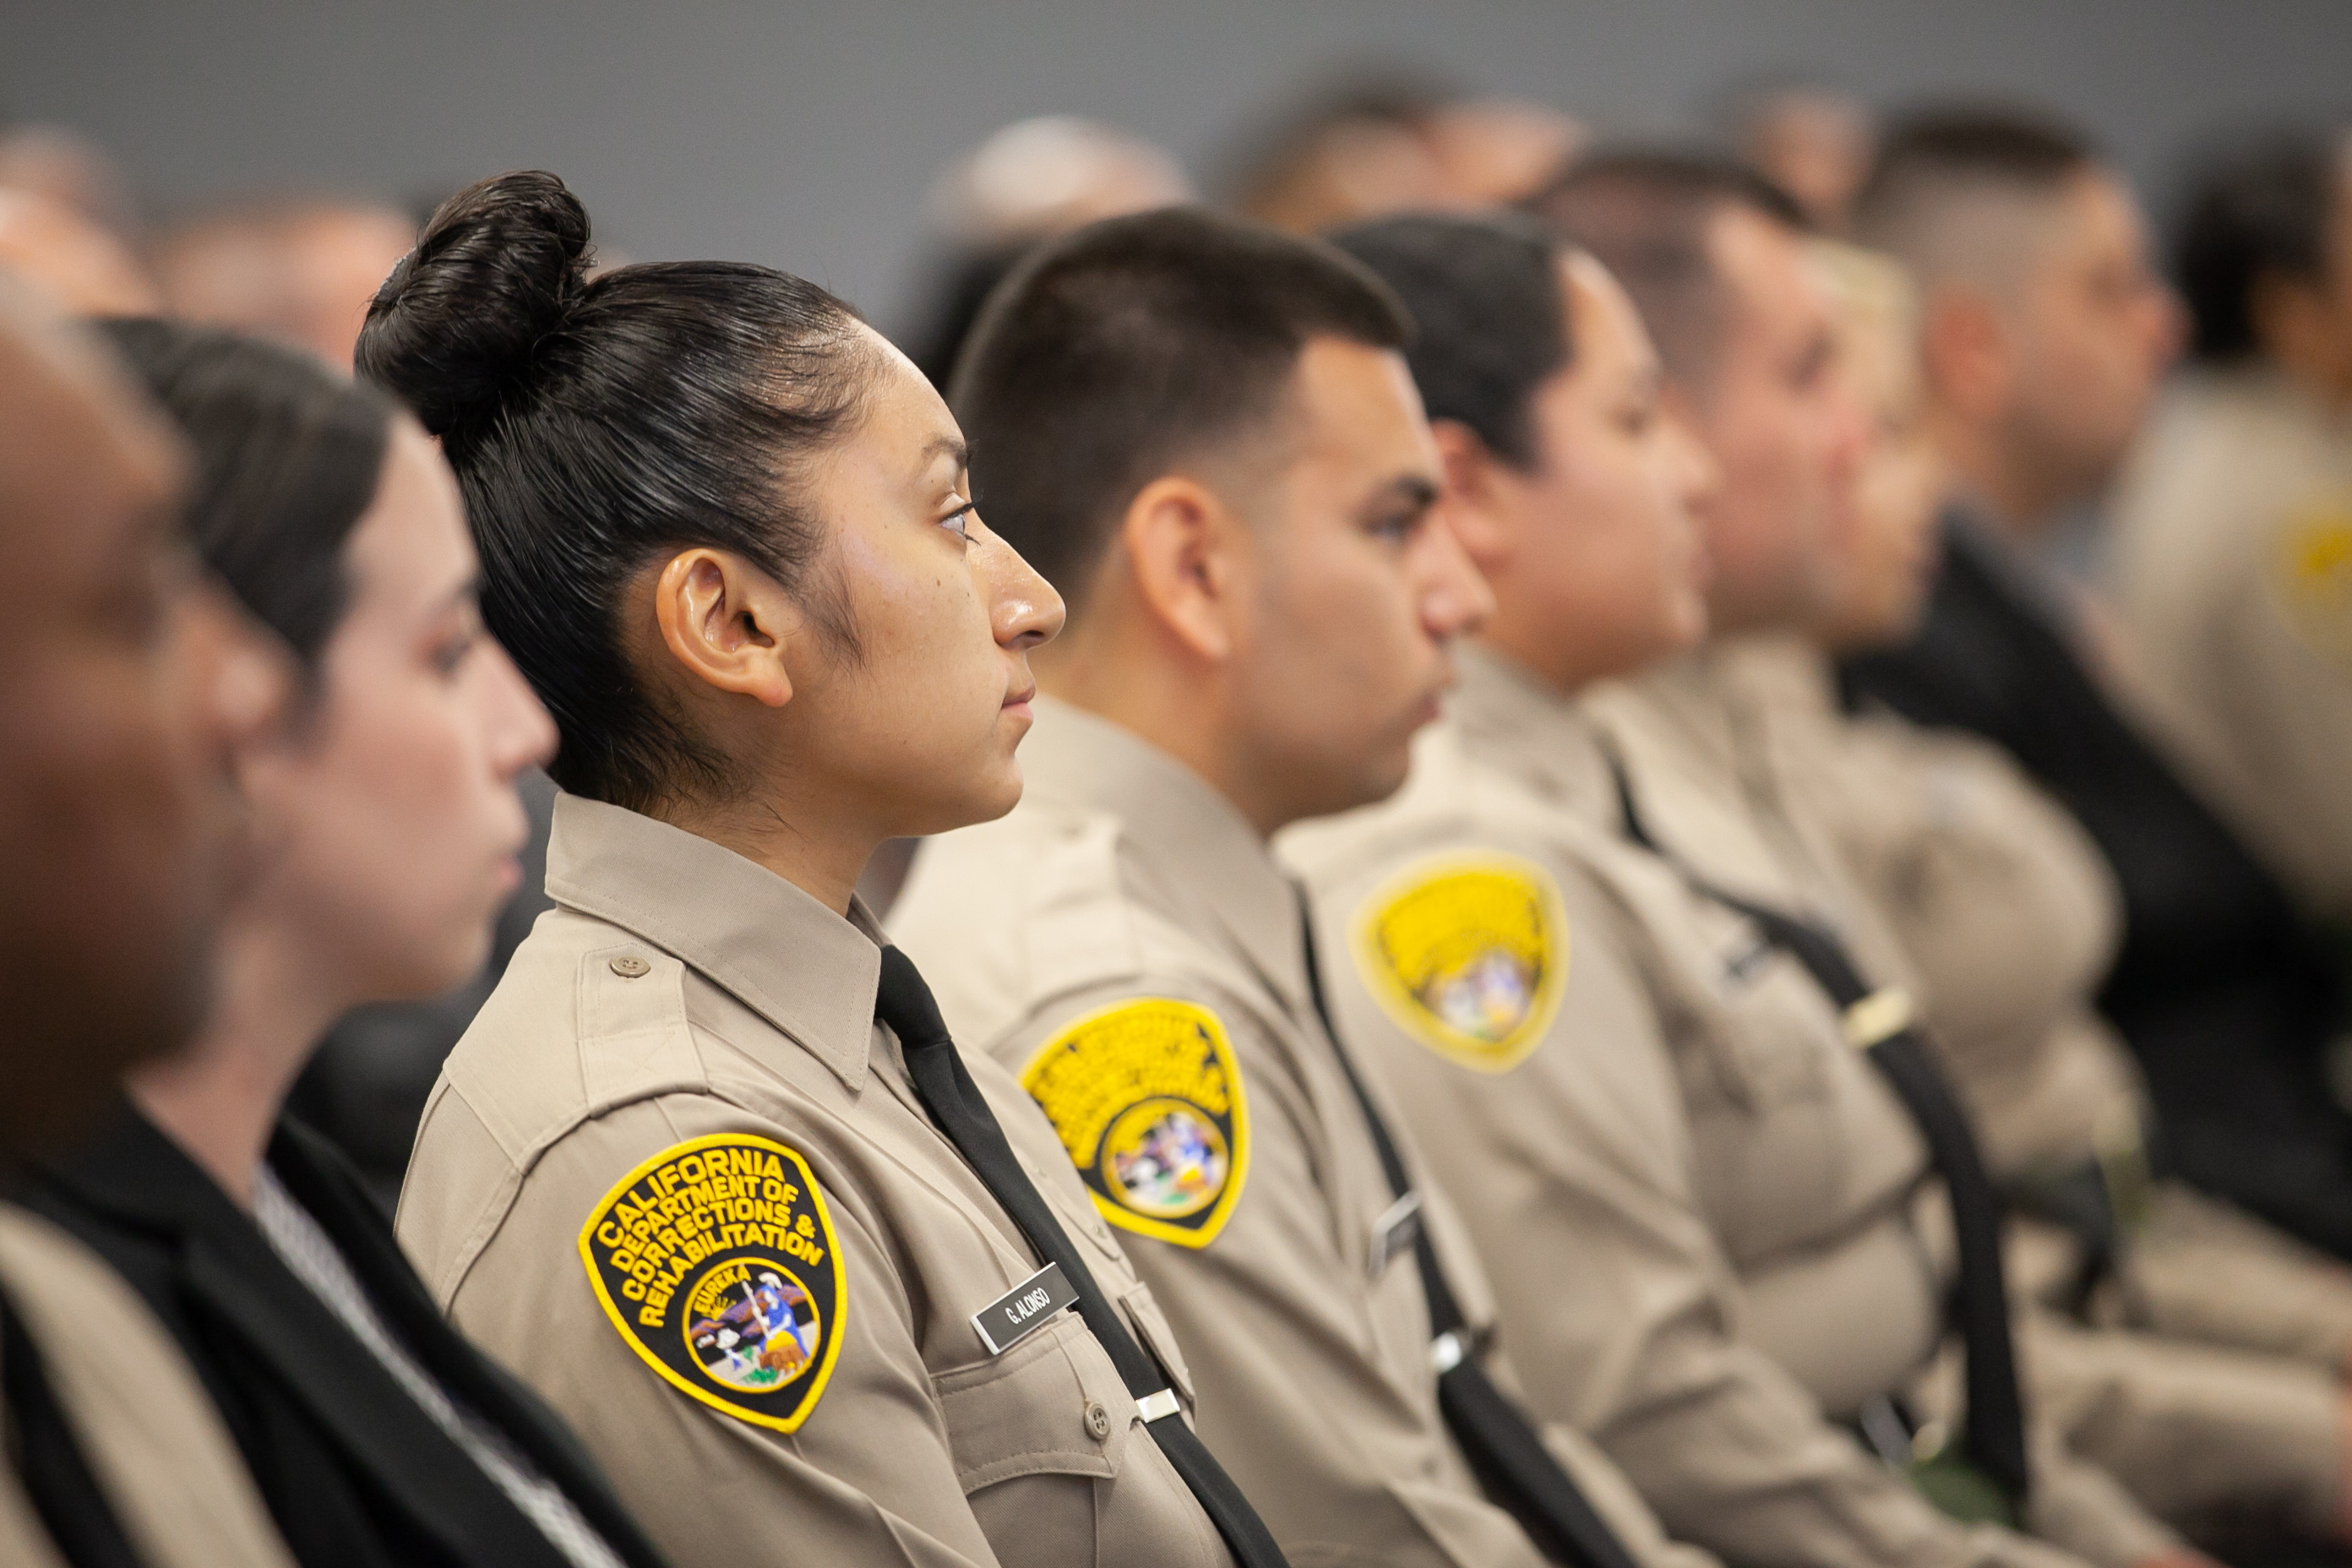 Newly sworn CDCR Officers seated at their graduation ceremony.